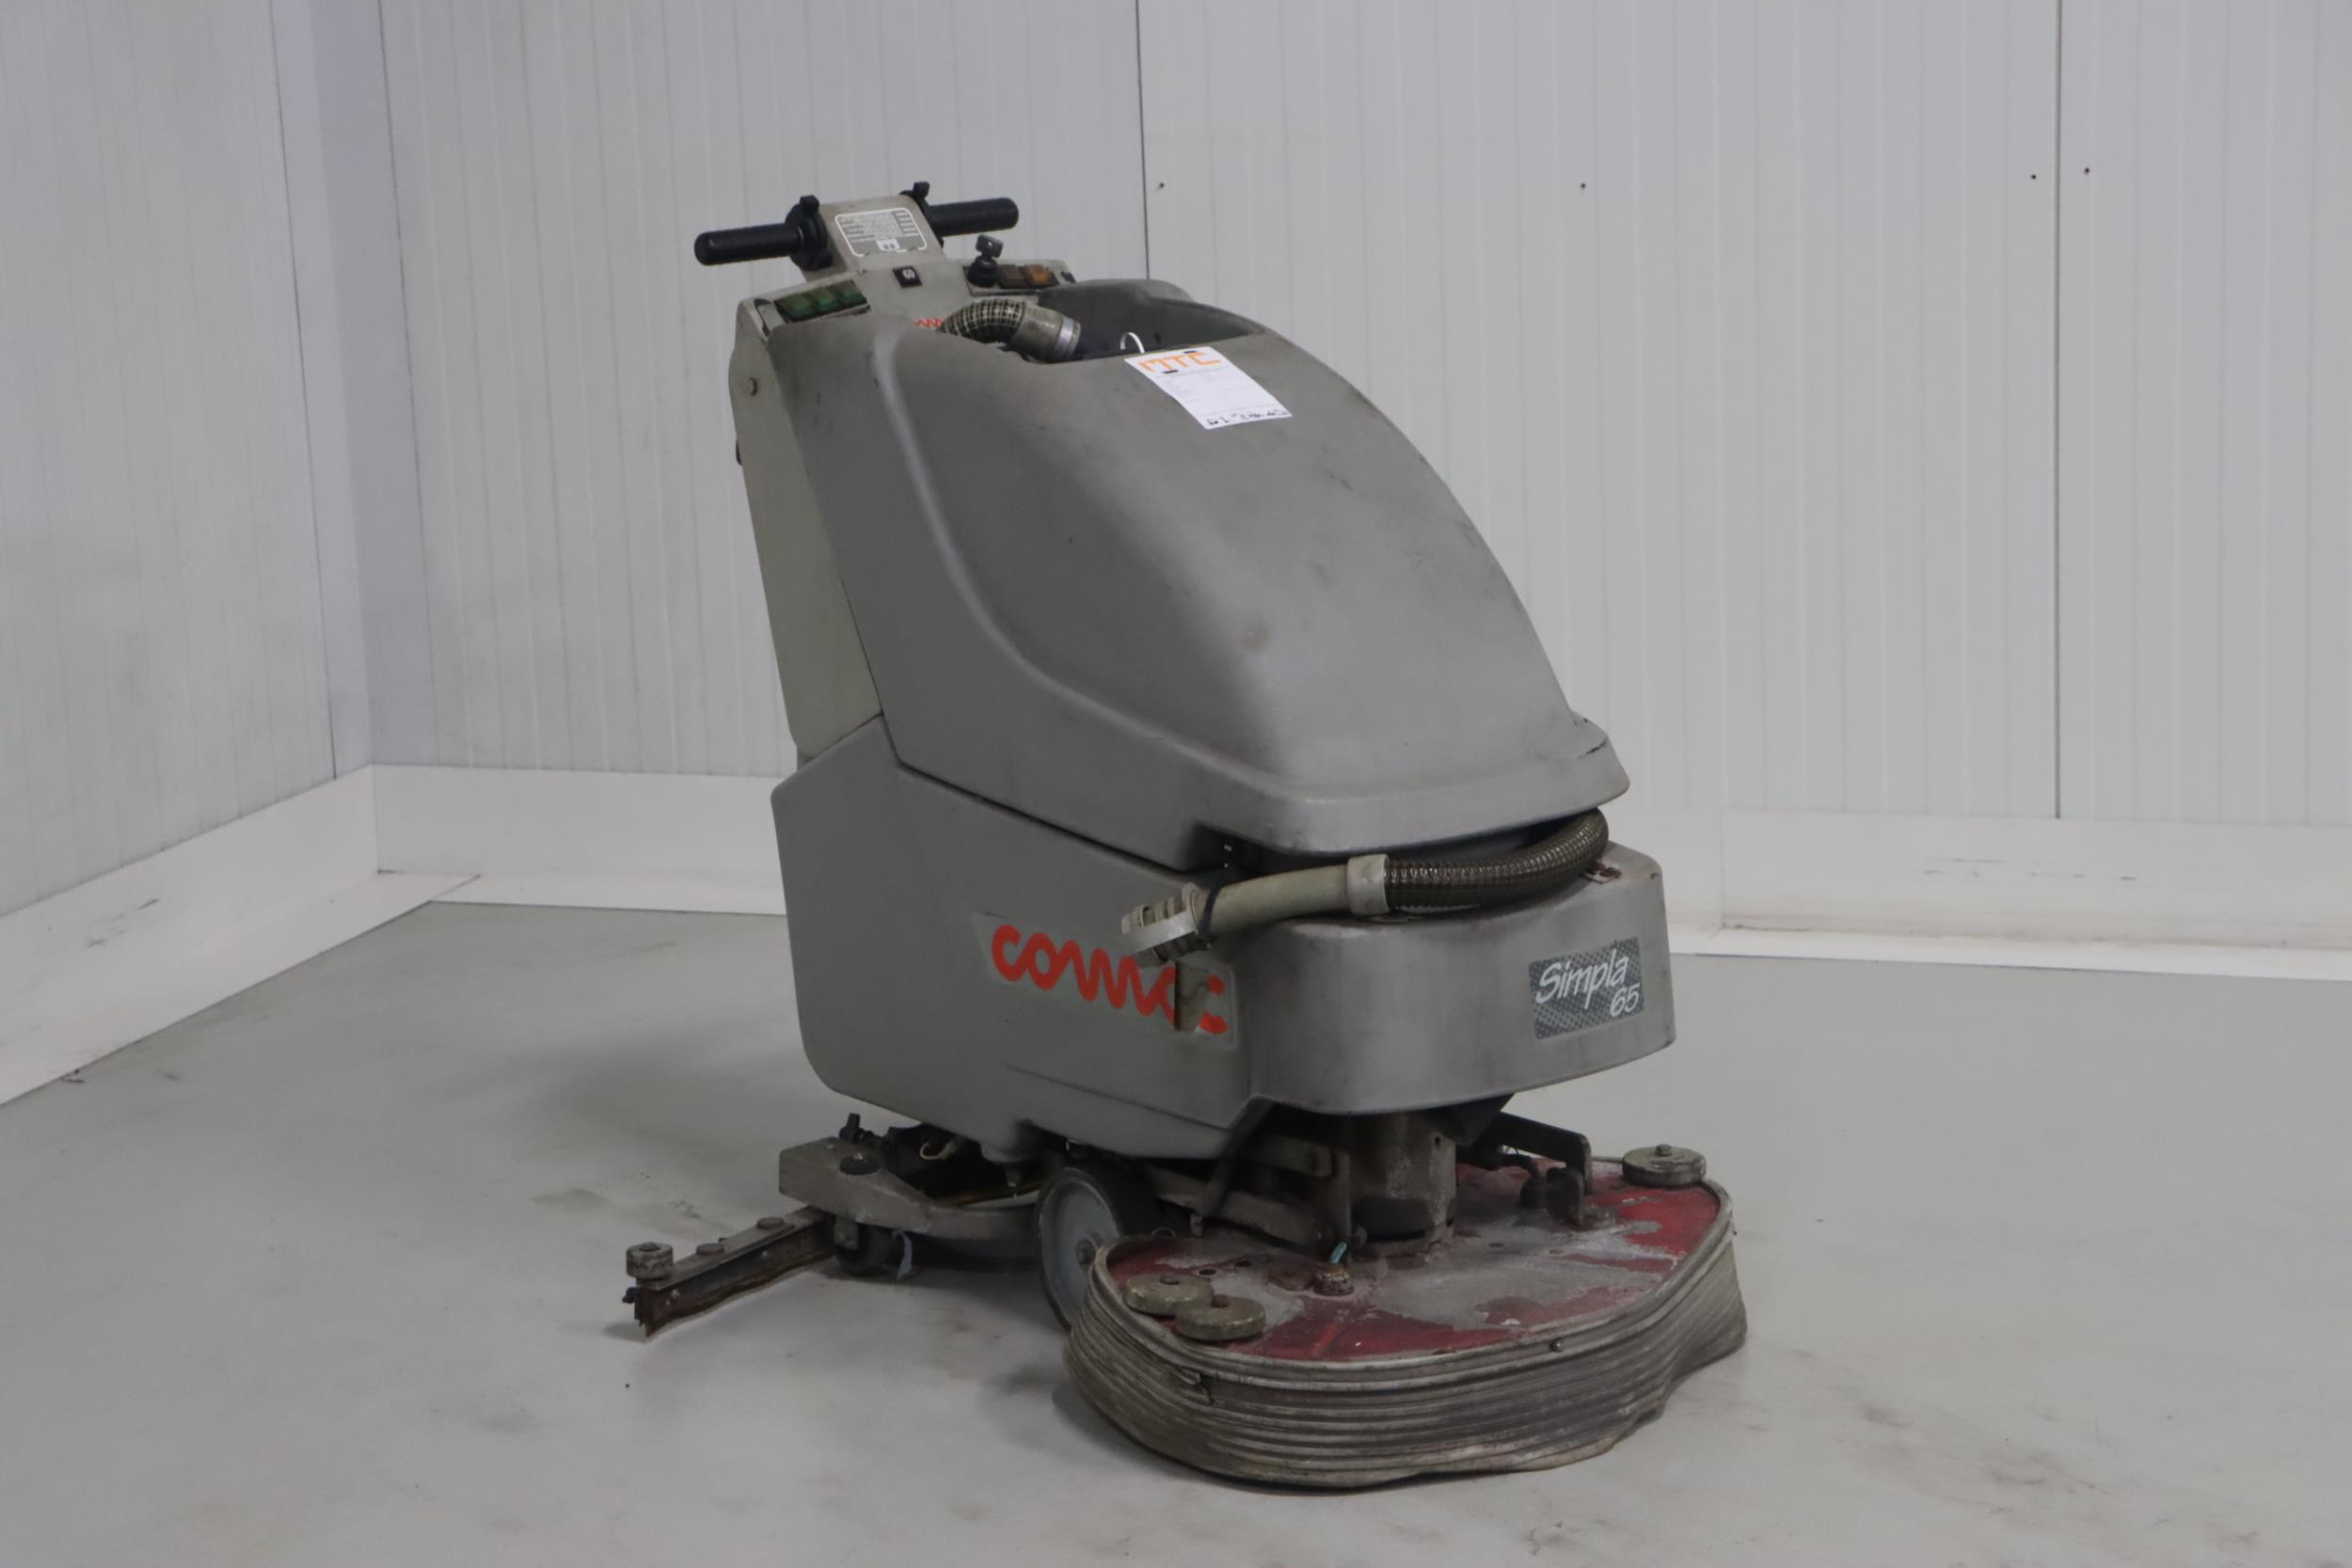 Comac Simpla 65 BT Sweepers and vacuum cleaning machine www.mtc-forklifts.com